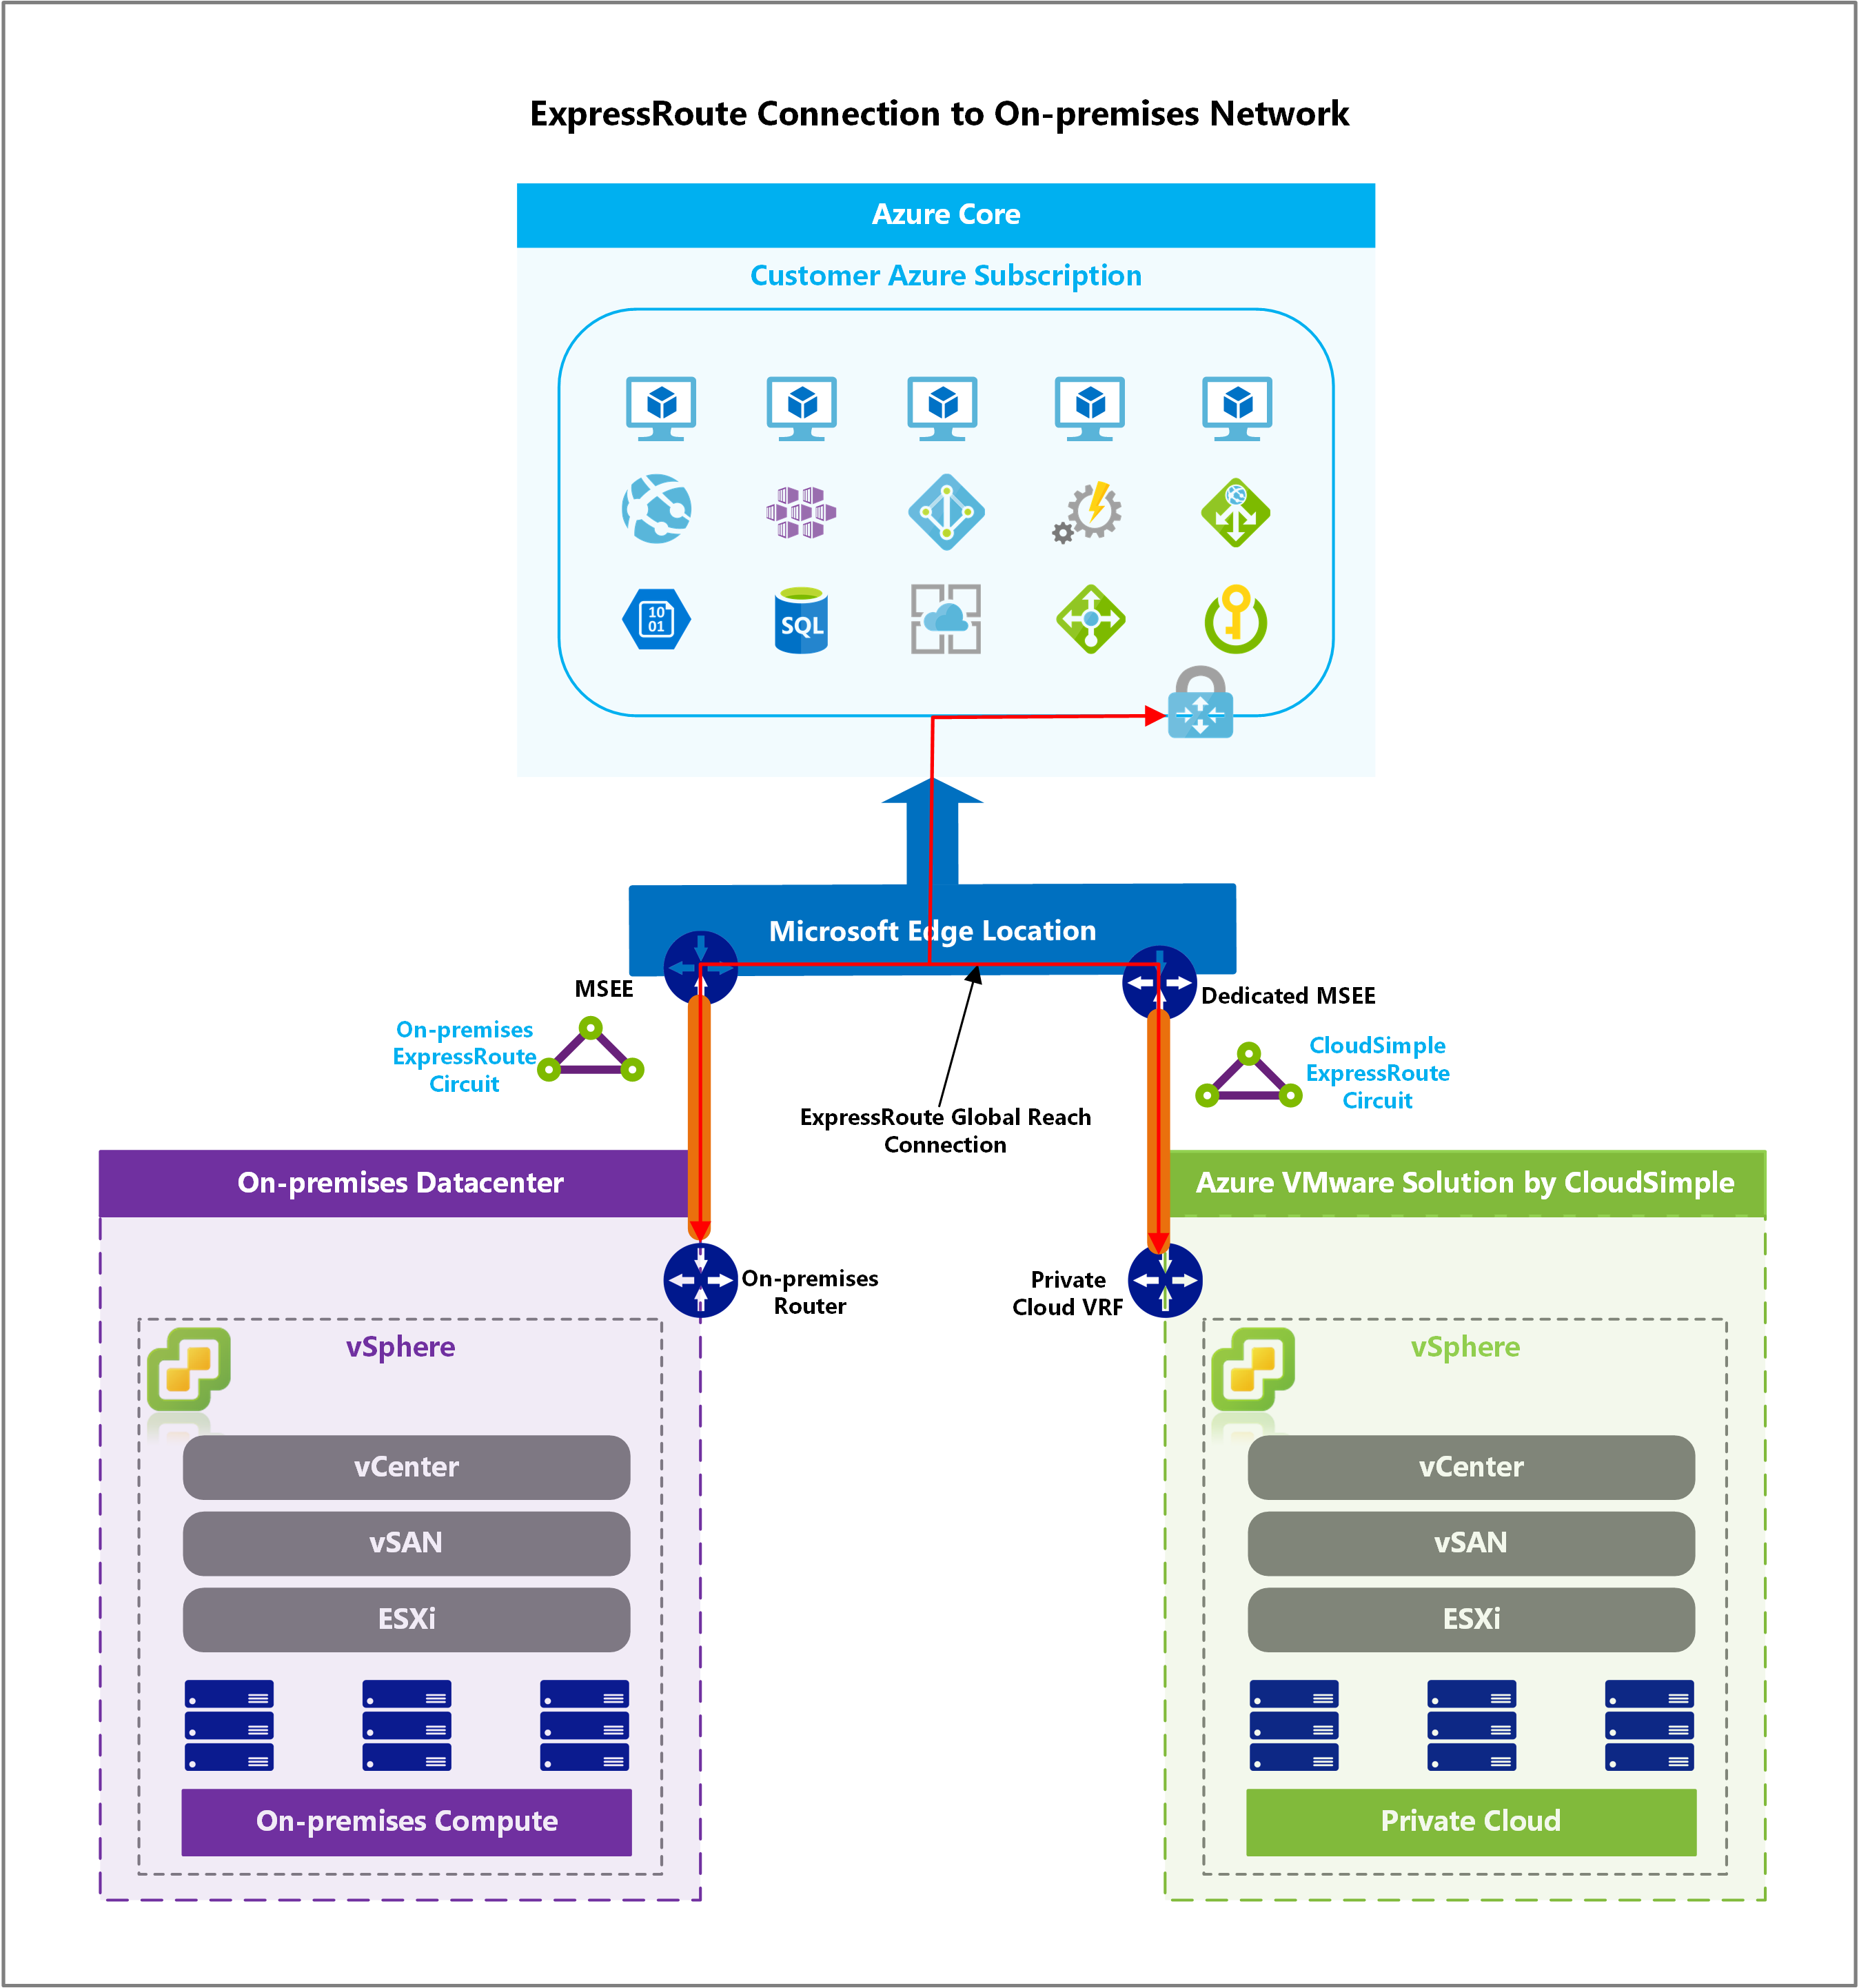 On-premises ExpressRoute Connection with Azure virtual network connection